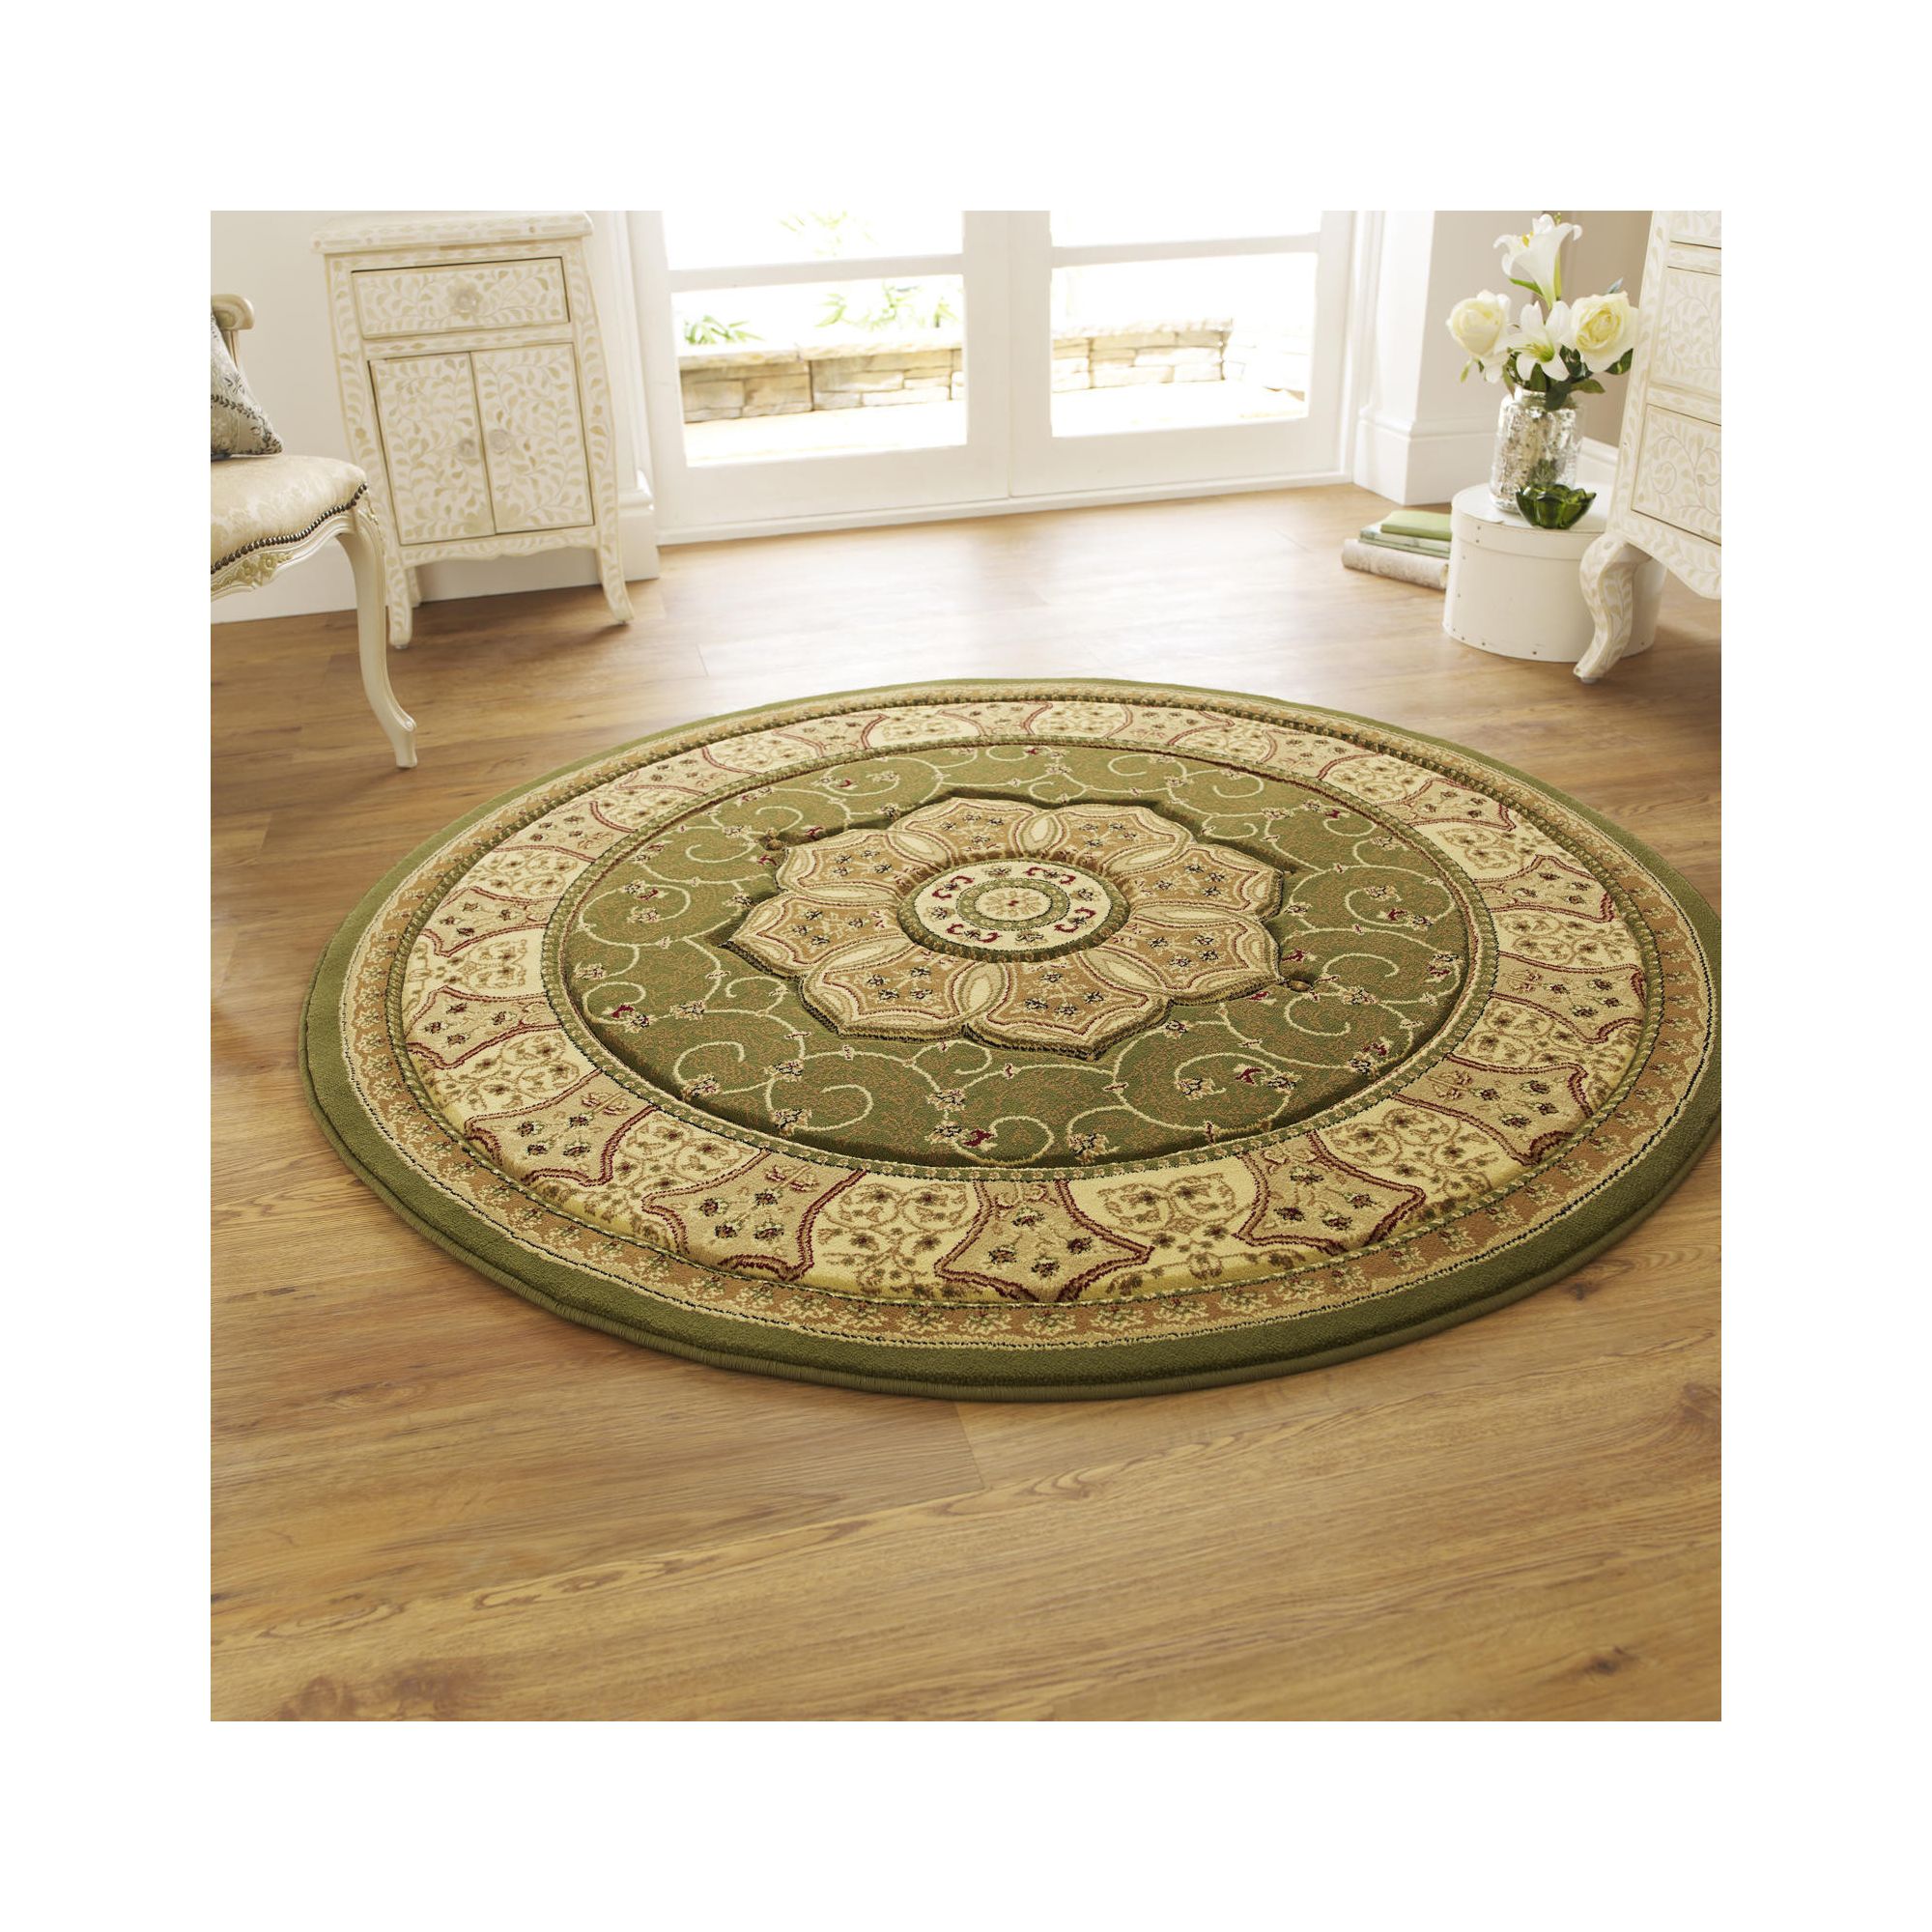 Oriental Carpets & Rugs Heritage 4400 Green Rug - 280cm x 380cm at Tesco Direct